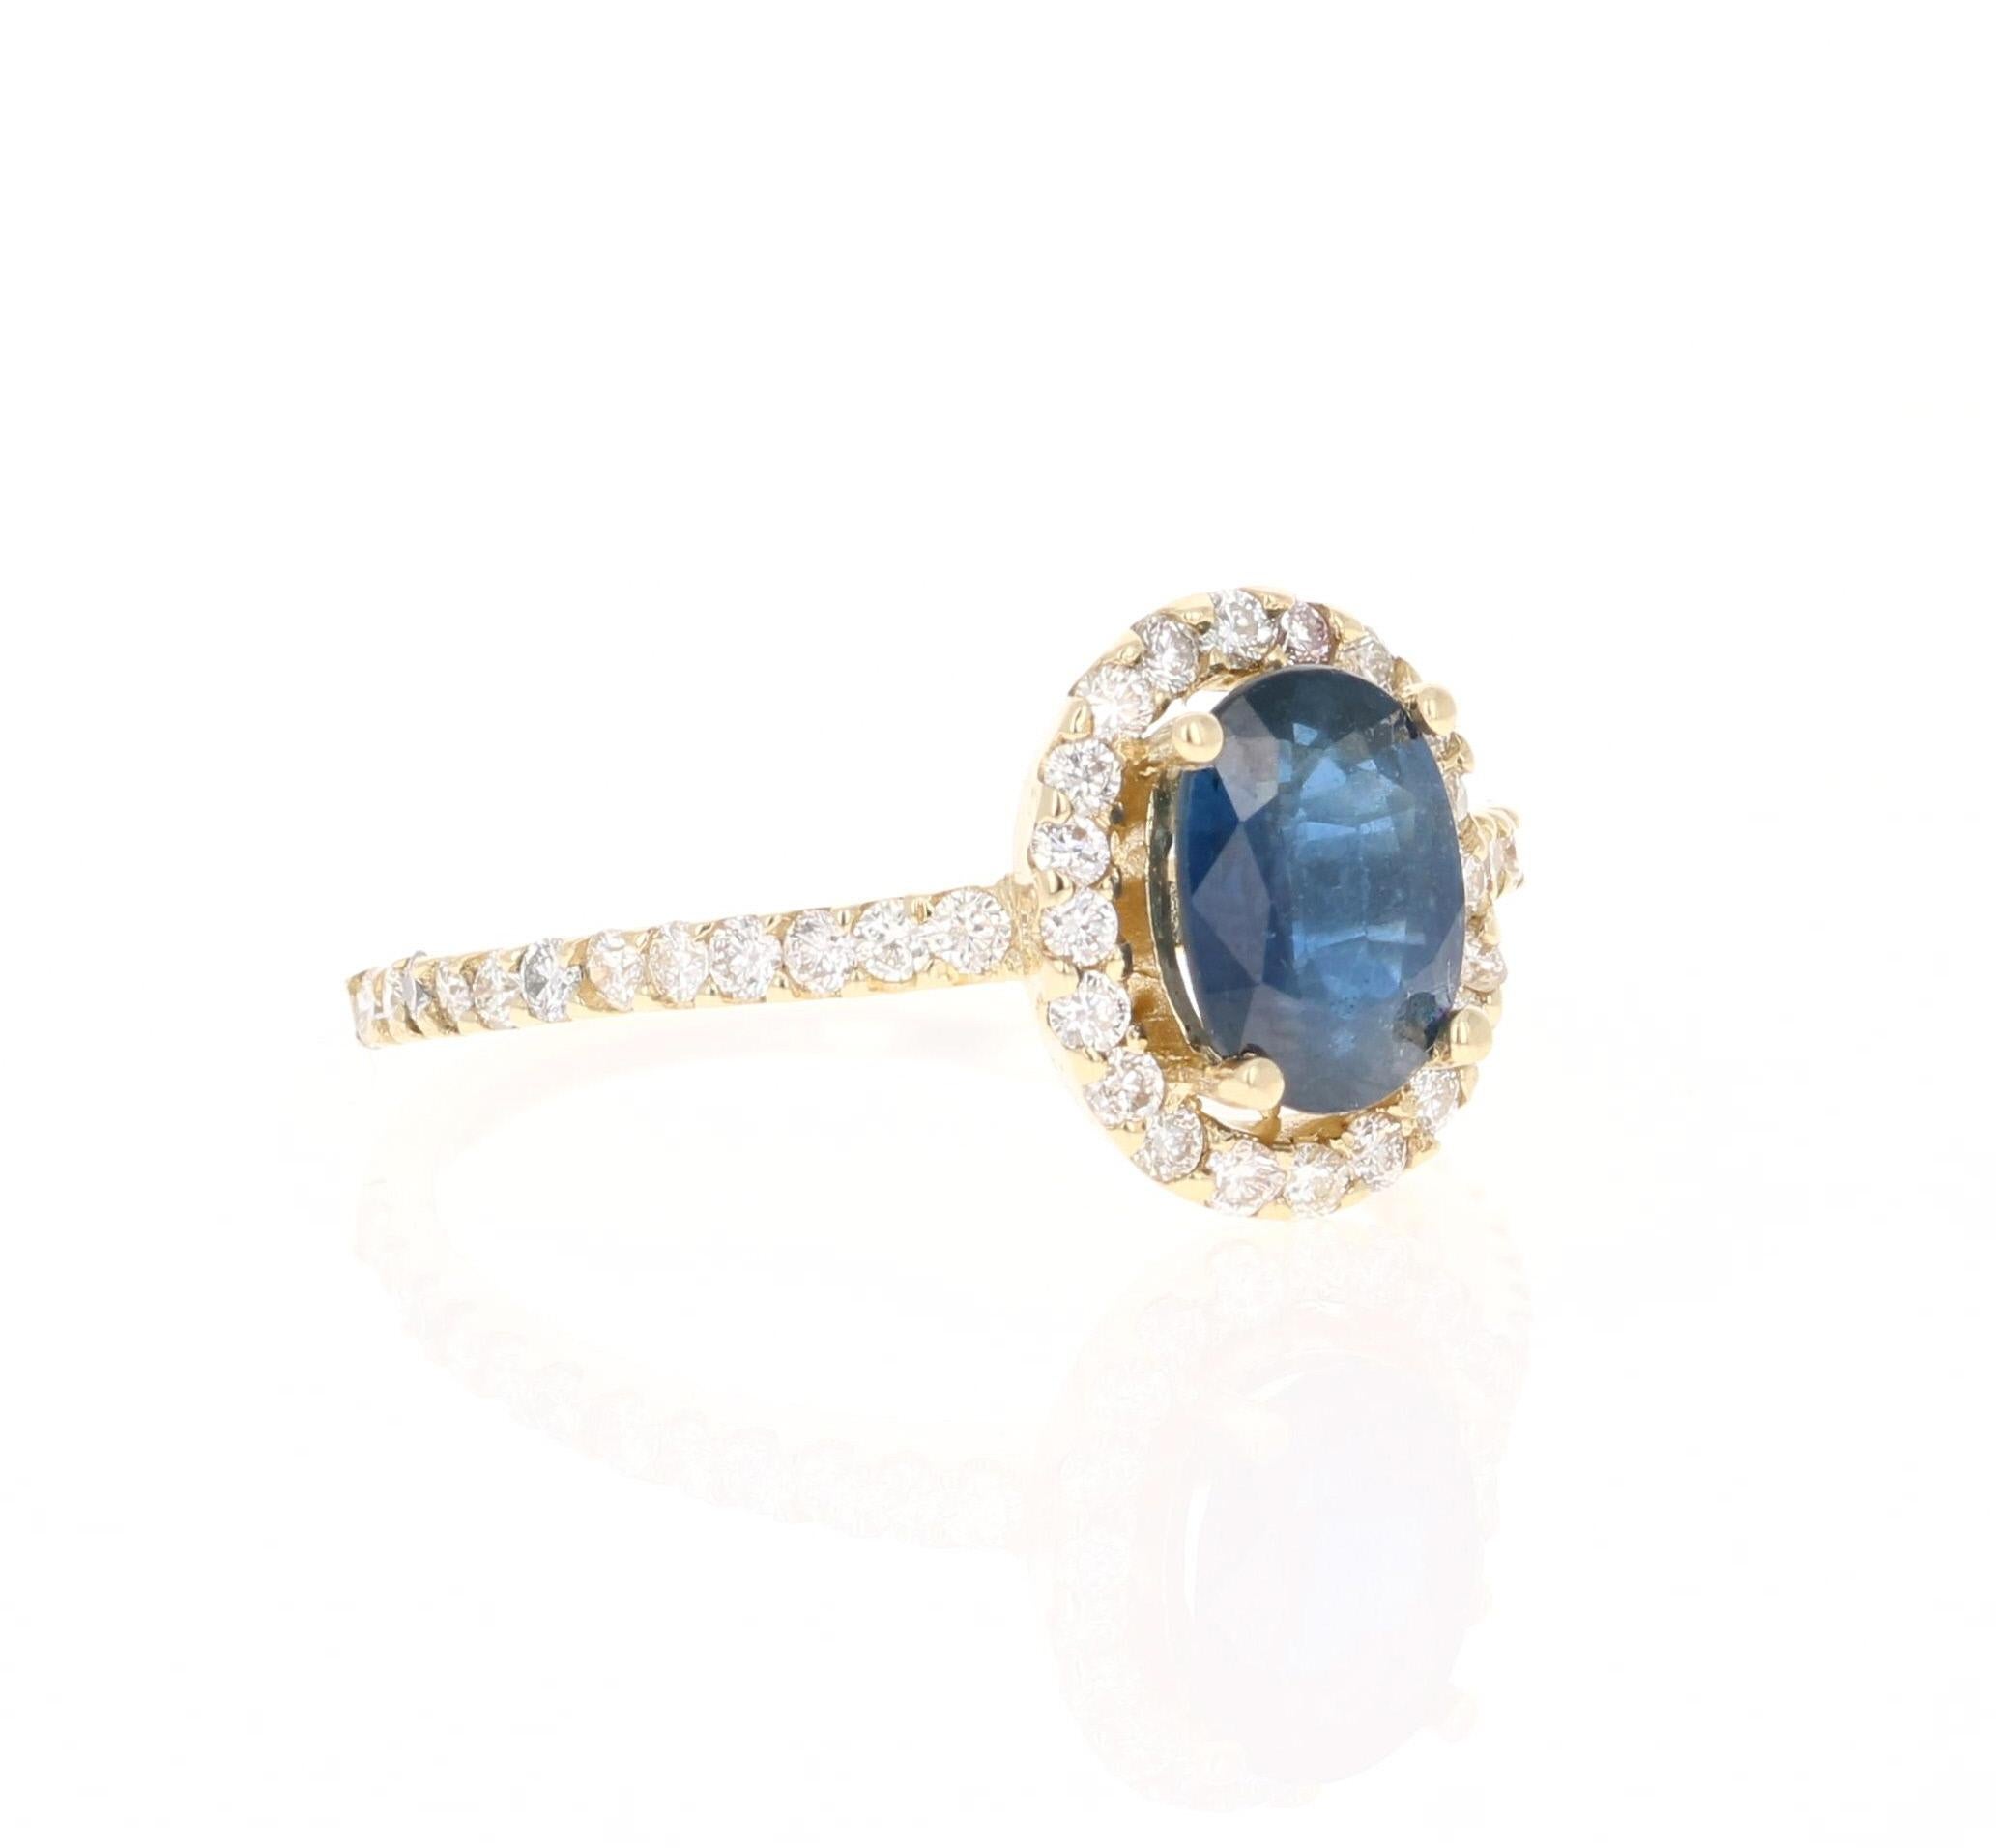 This ring has a Oval Cut Natural Blue Sapphire that weighs 1.26 carats and is surrounded by 44 Round Cut Diamonds that weigh 0.57 carats. The total carat weight of the ring is 1.83 carats. (Clarity: VS, Color: H)

The ring is set in 14 Karat Yellow